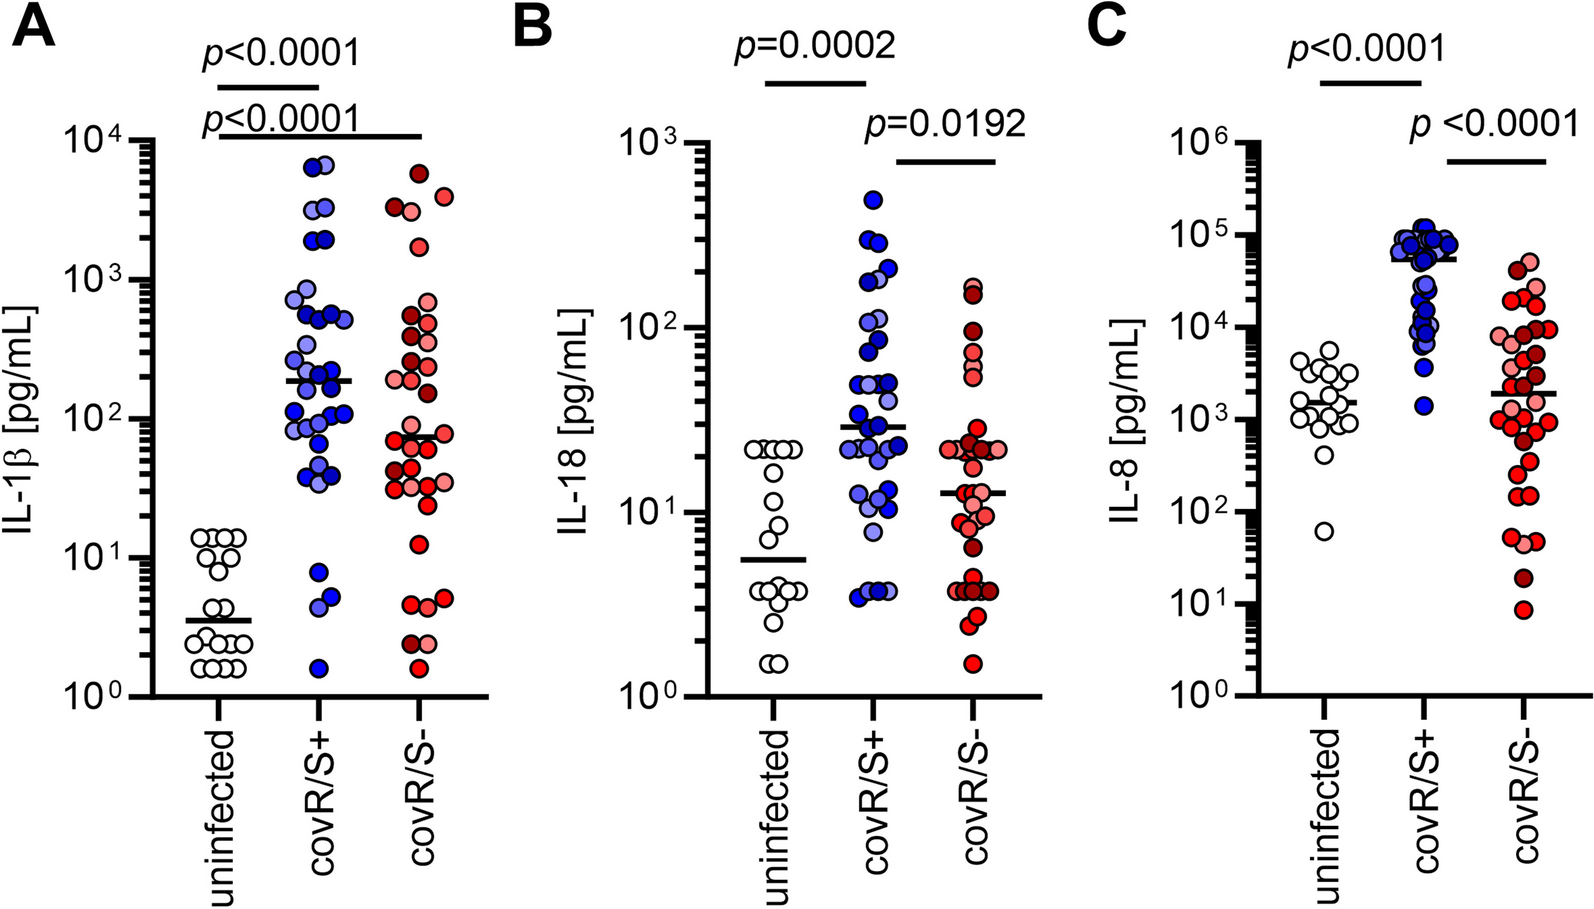 Reduced interleukin-18 secretion by human monocytic cells in response to infections with hyper-virulent Streptococcus pyogenes